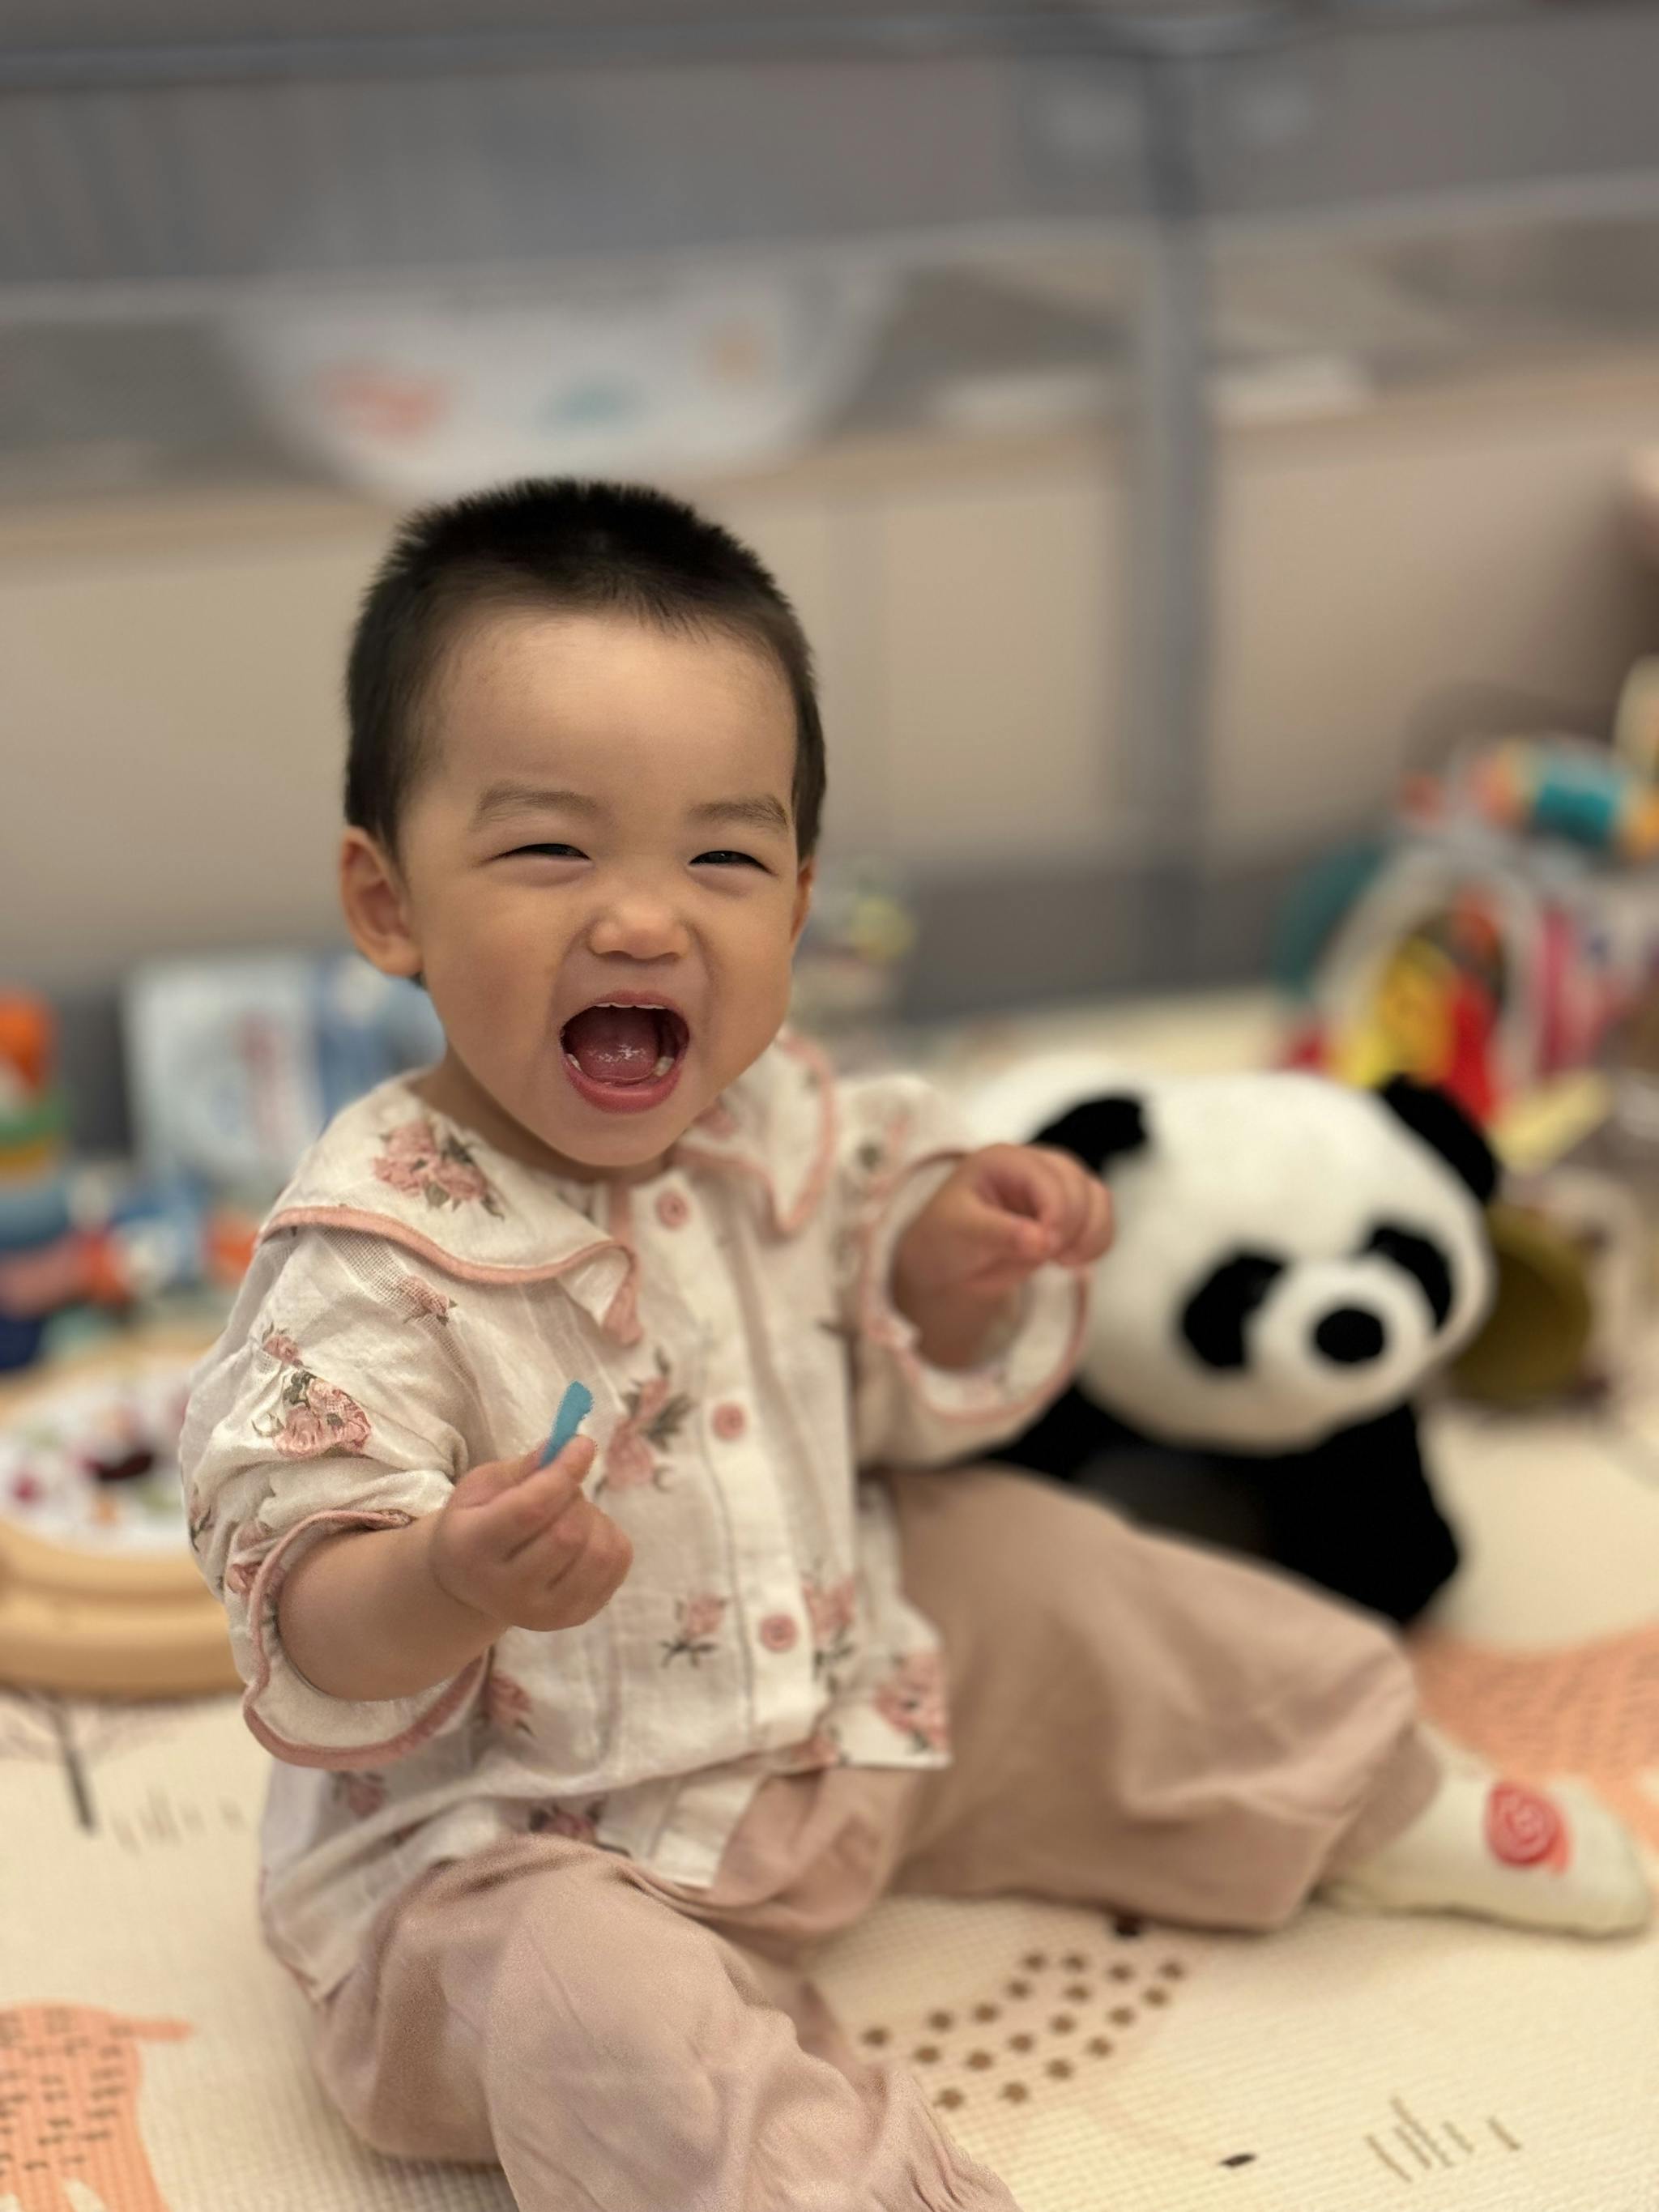 A smiling baby sits on the floor with a plush panda toy beside them, surrounded by various other toys, exuding joy and playfulness